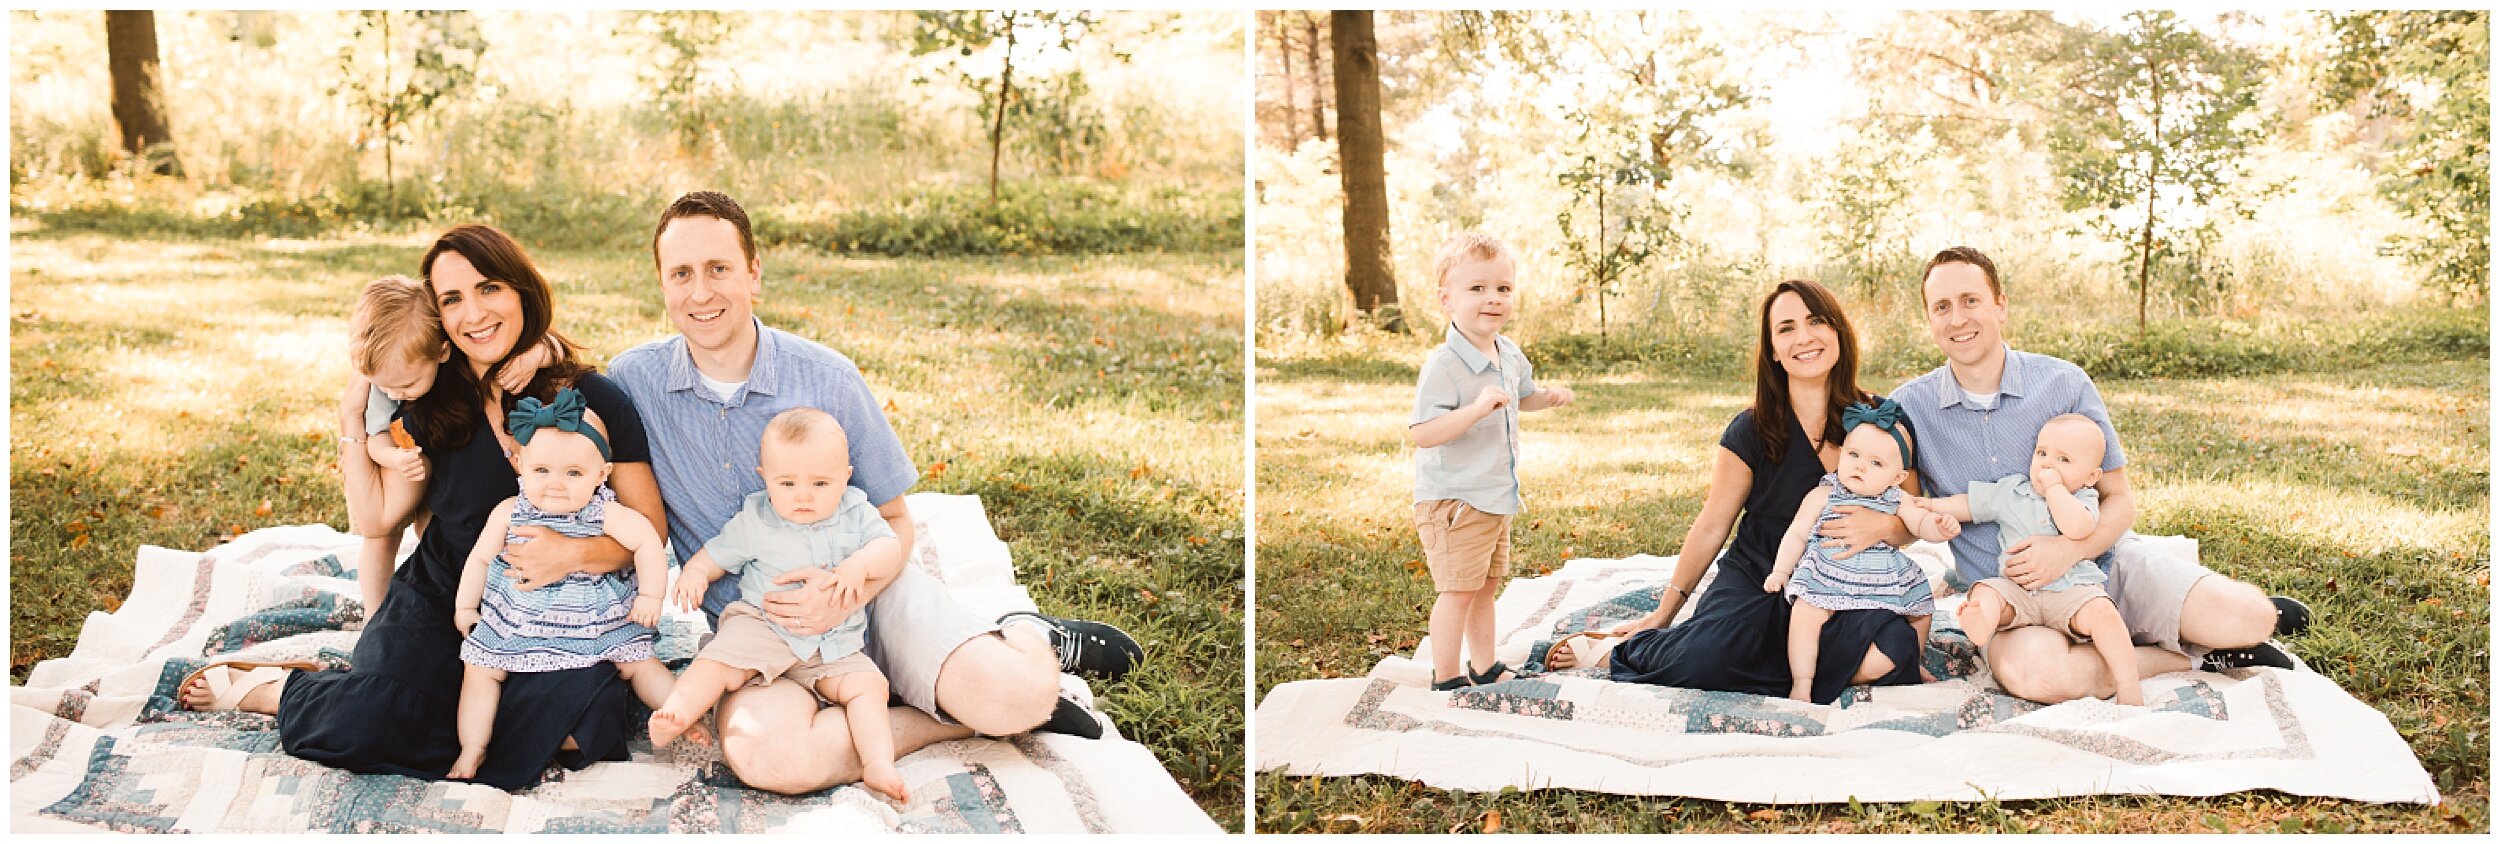 Family photography with twins